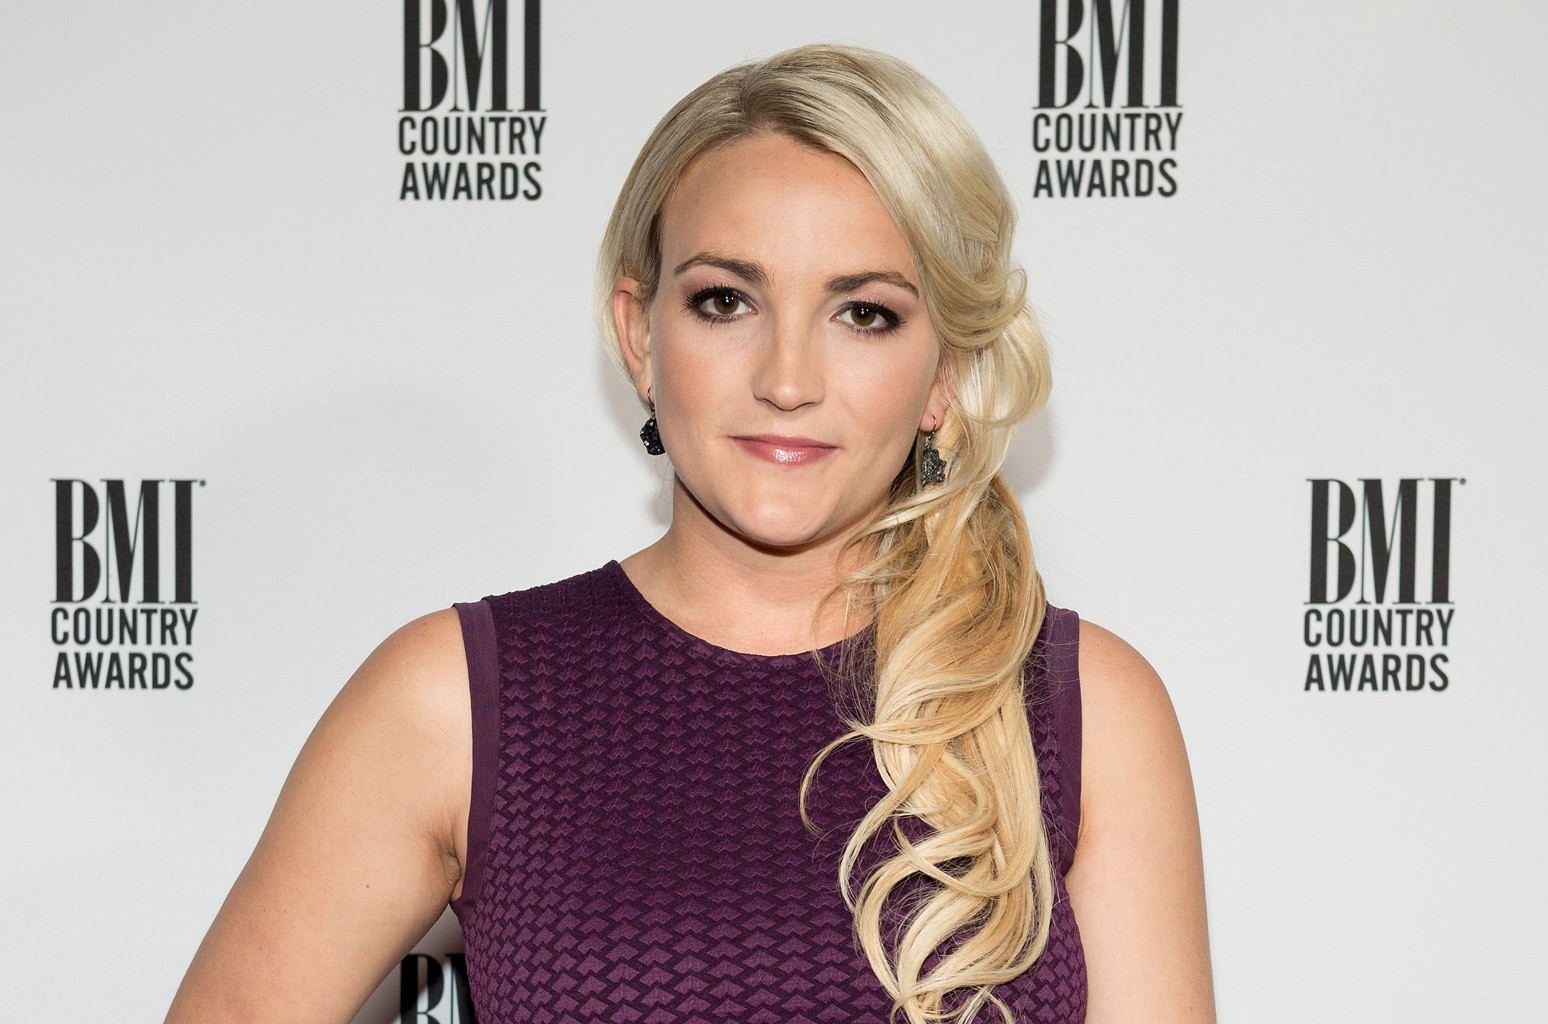 Jamie Lynn Spears talks her version of her fight with Britney